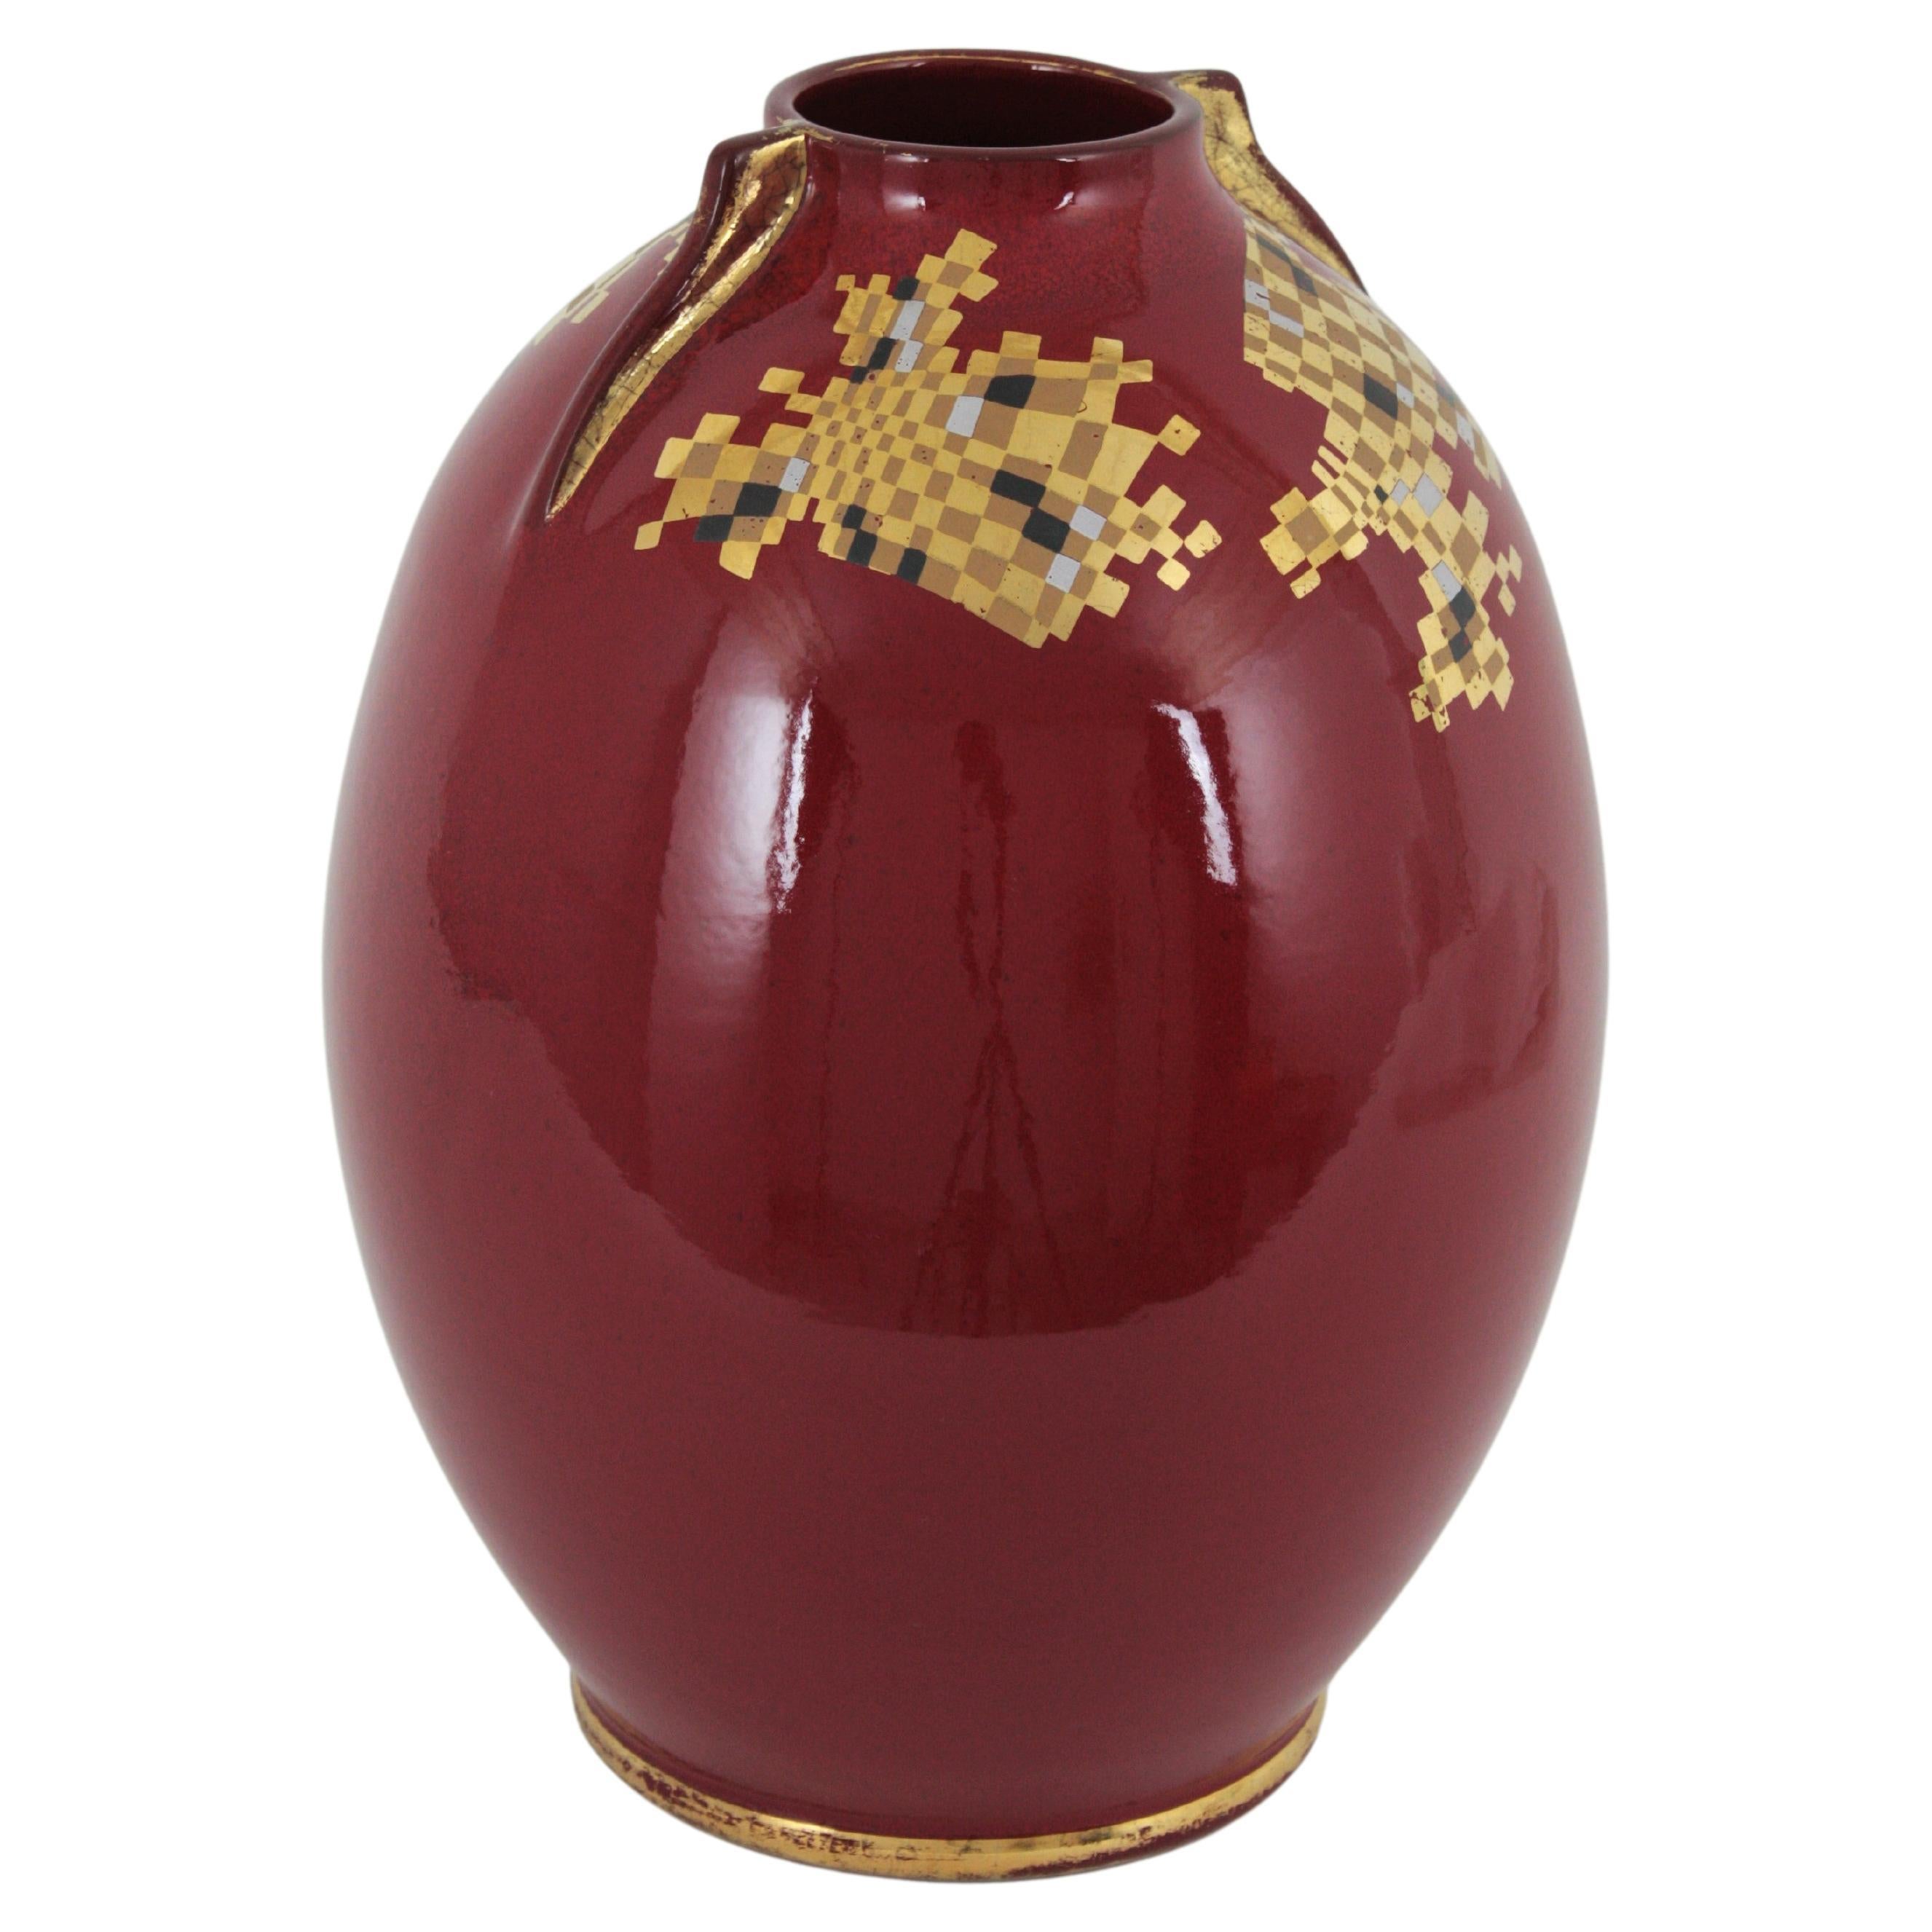 An exquisite handmade glazed ceramic vase from the Spanish manufacturer Casa Bohemia. Spain, 1960s.
A highly decorative piece in a vibrant red glazed color with geometric decorations and gold leaf accents that remind the Gustav Klimt geometric